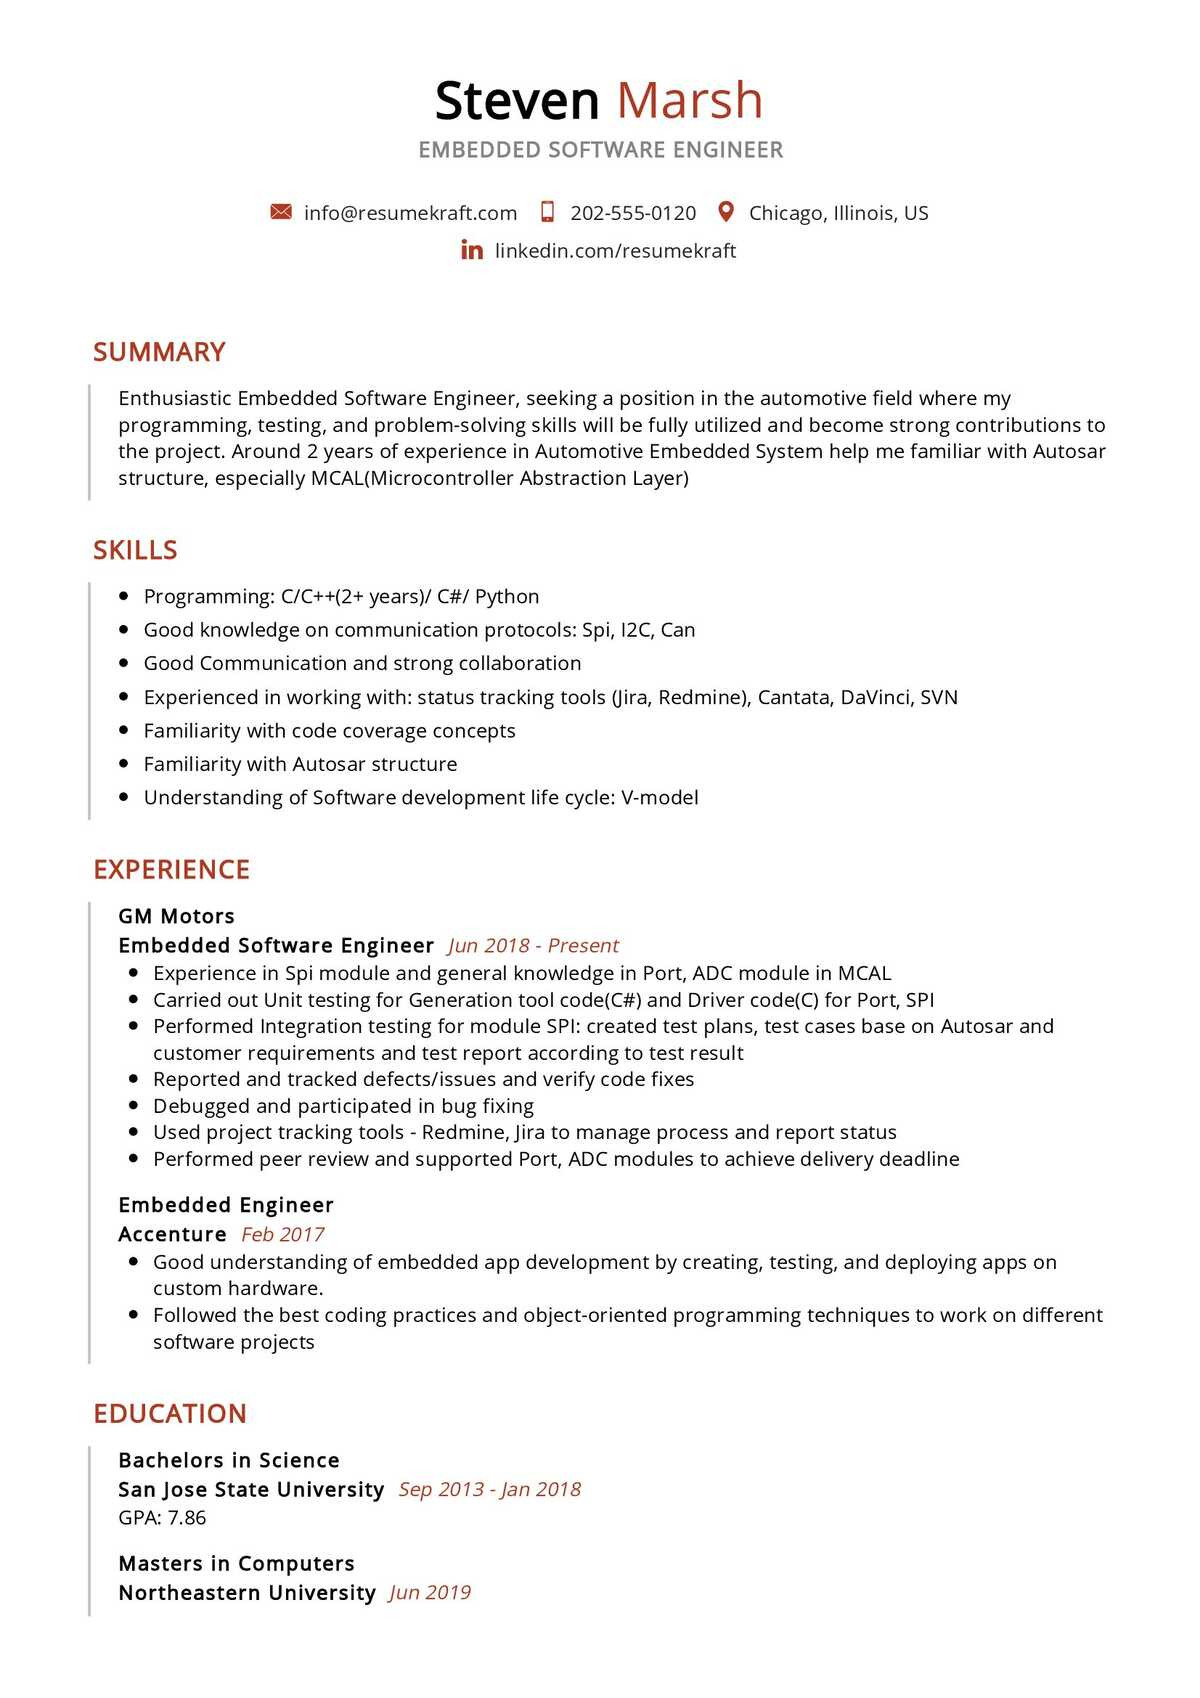 Sample Resume for Experienced Embedded software Engineer Embedded software Engineer Resume Sample 2021 Writing Guide …